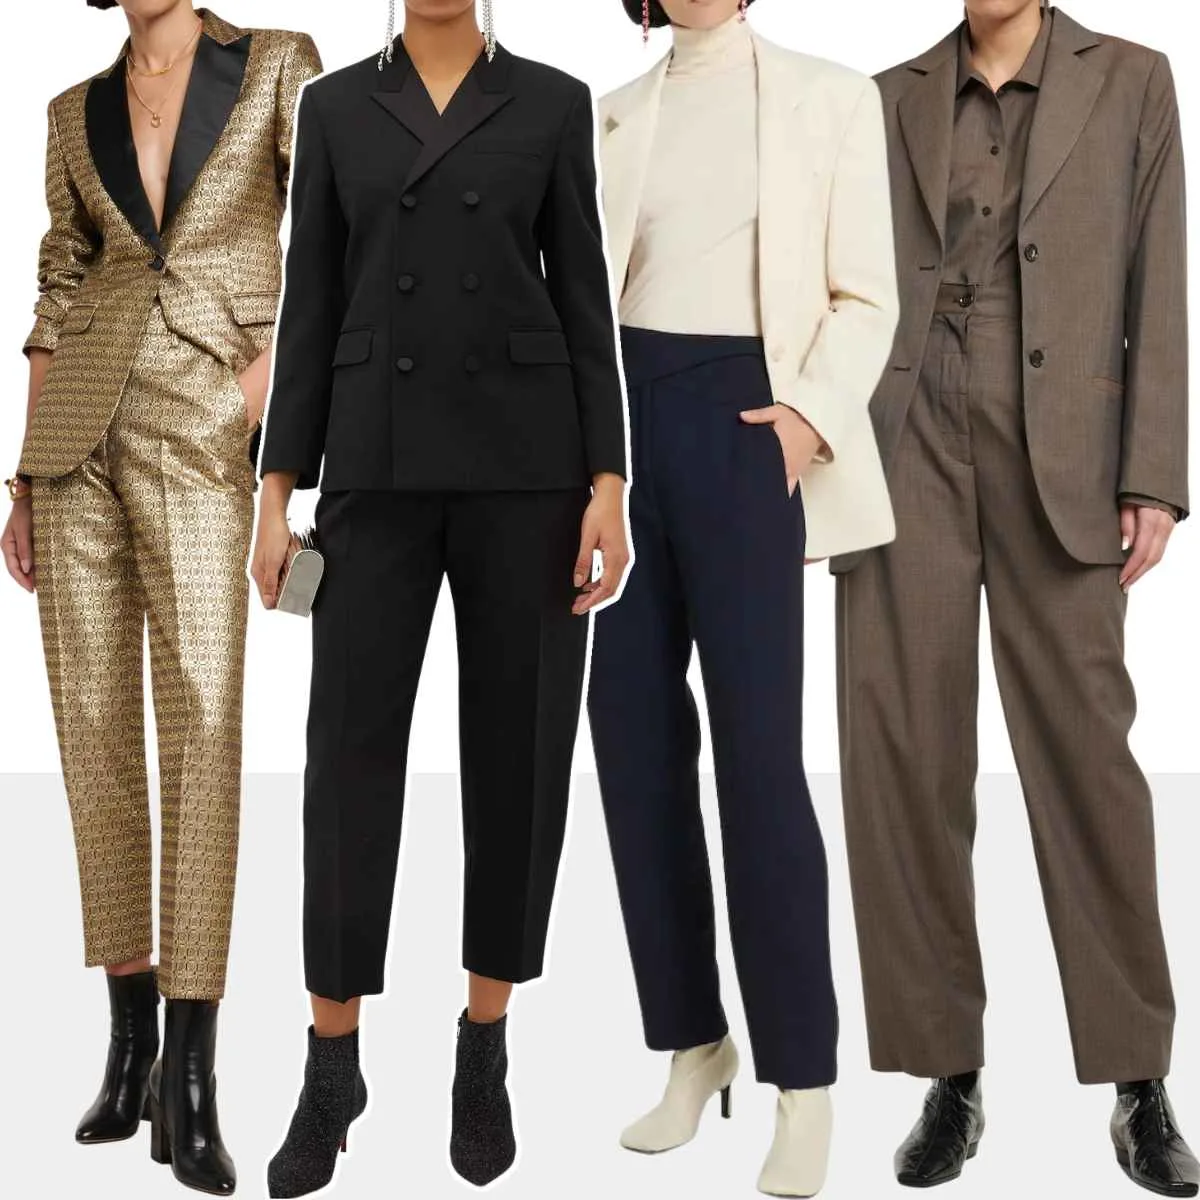 Collage of 5 women wearing various pantsuits with ankle boots.